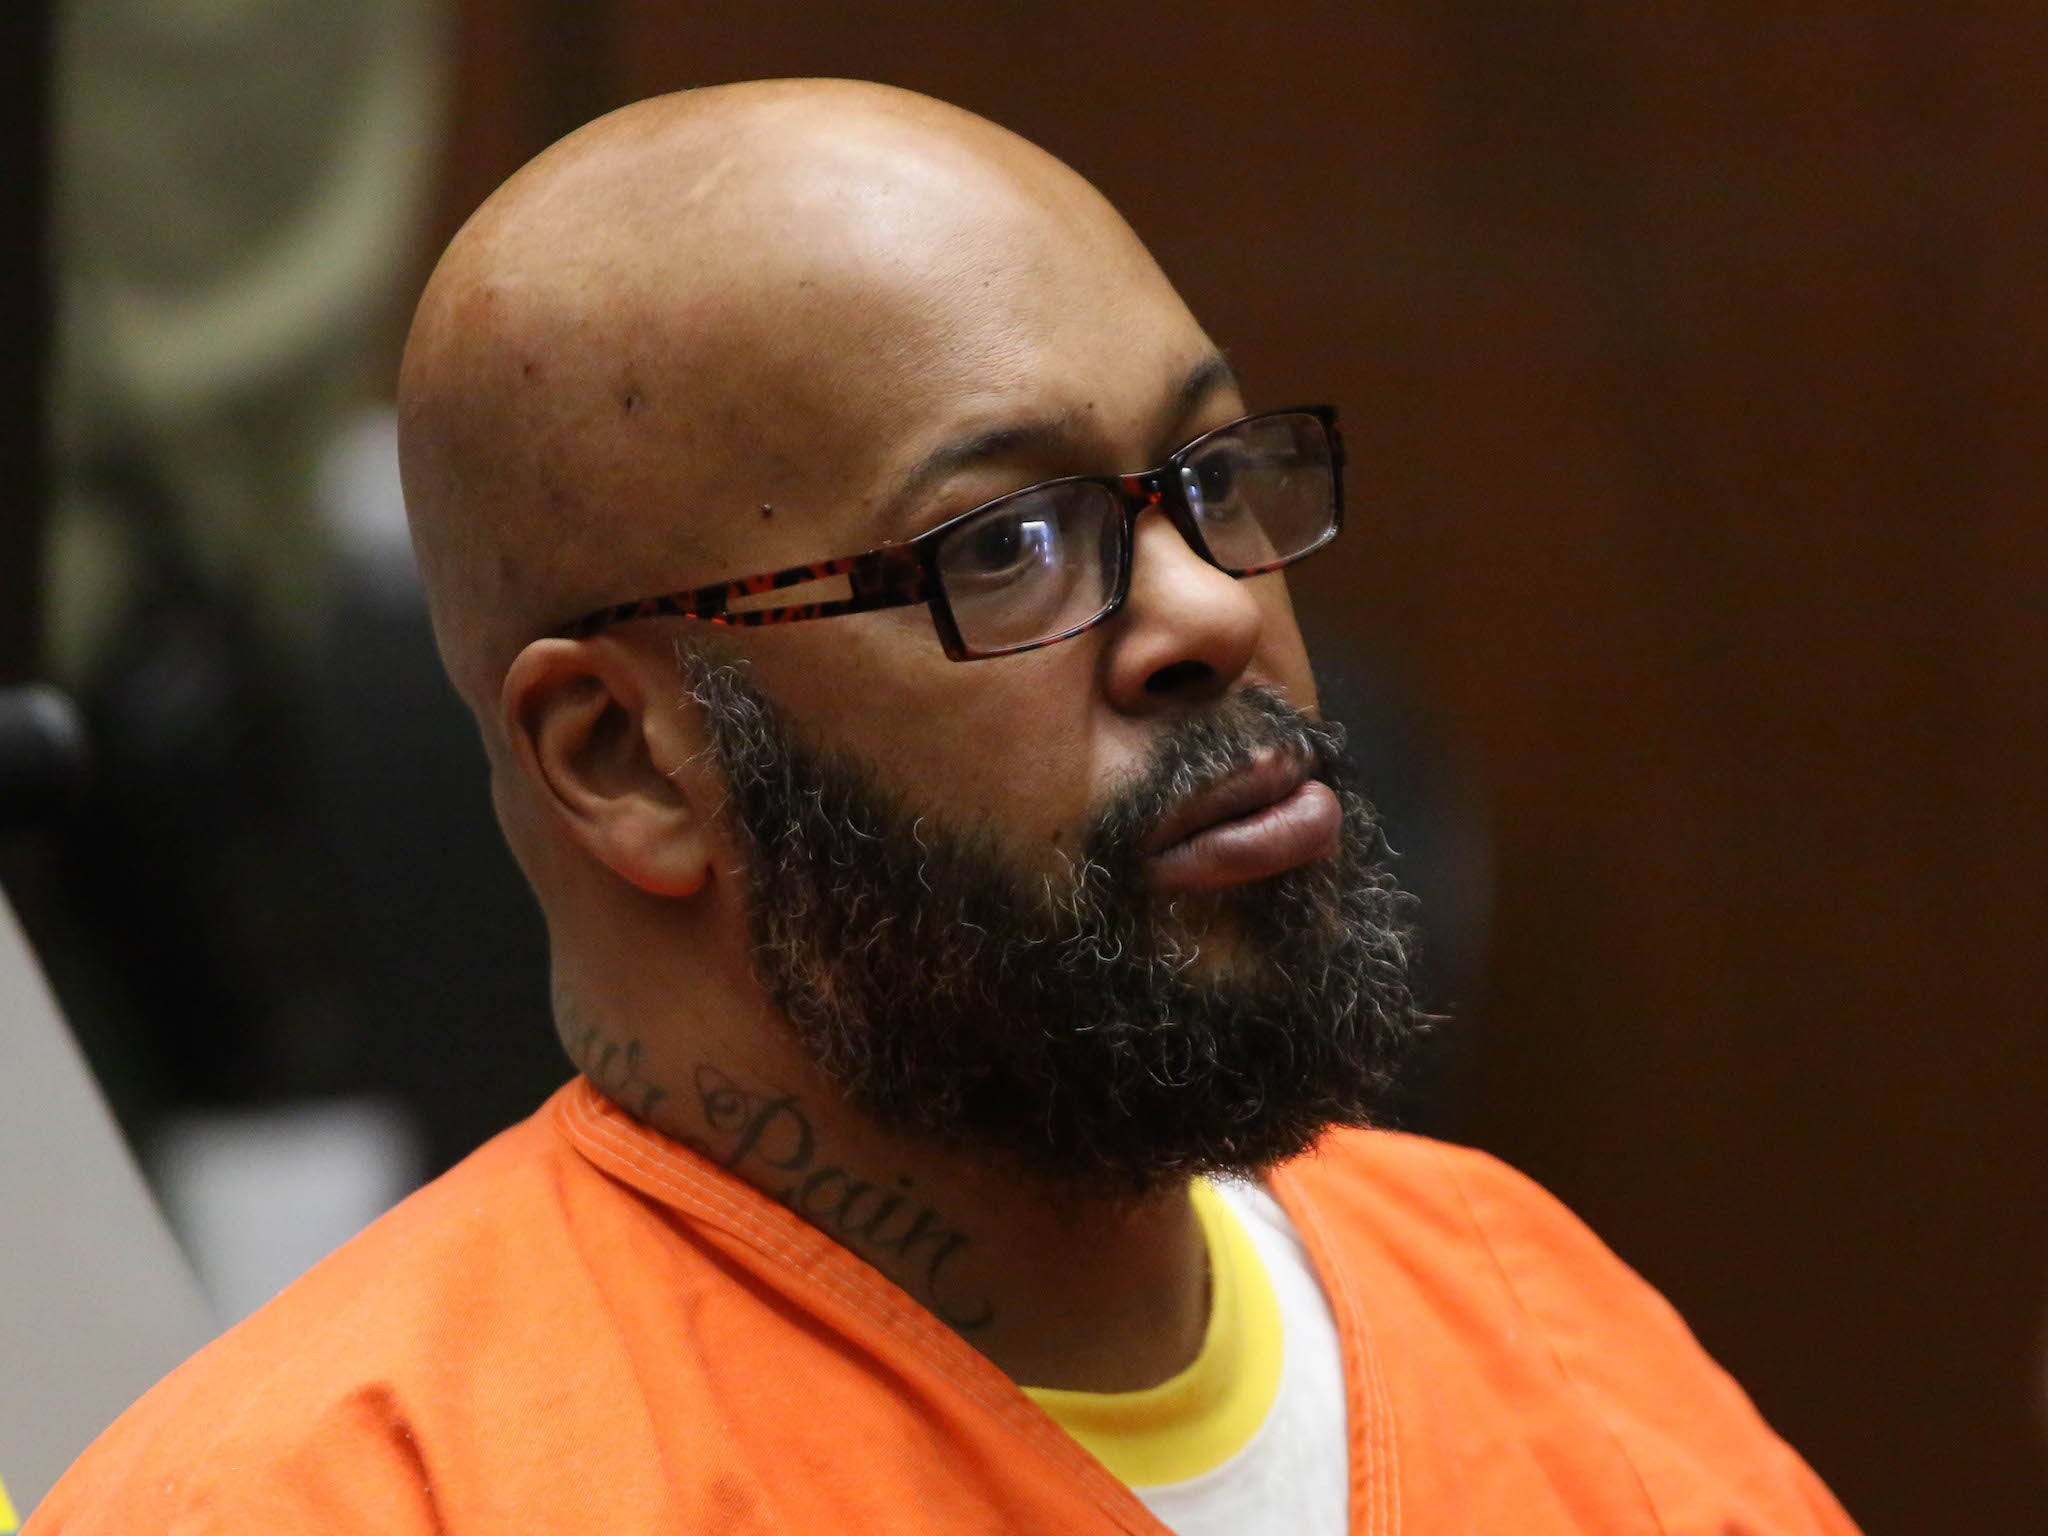 Suge Knight has denied the allegations against him